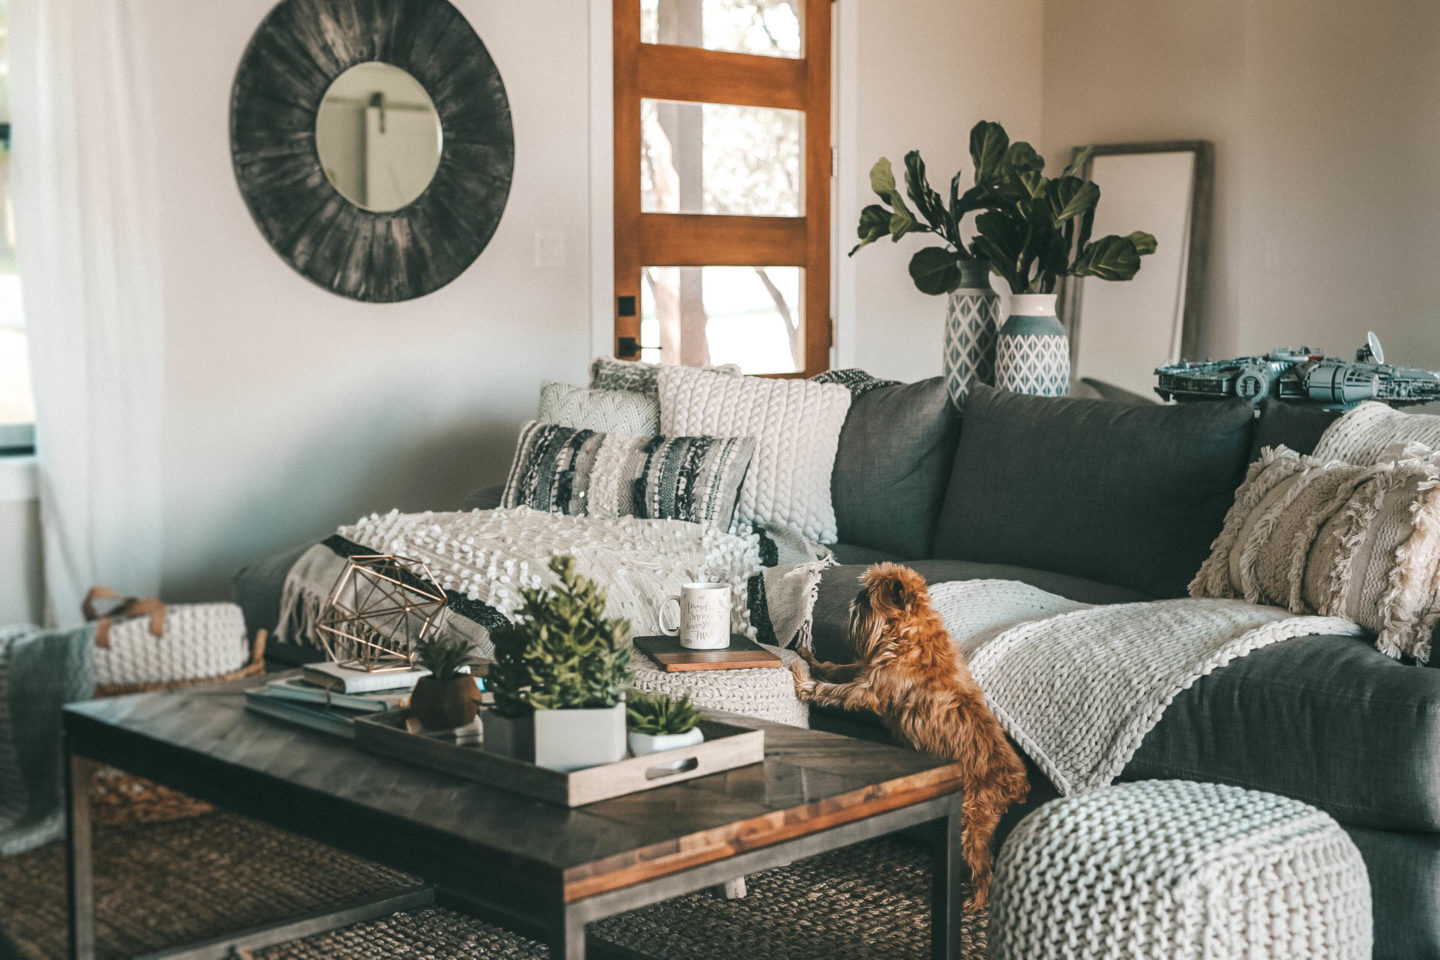 Fall Home Decor for a Cozier Home with Nordstrom Decor | Dressed to Kill